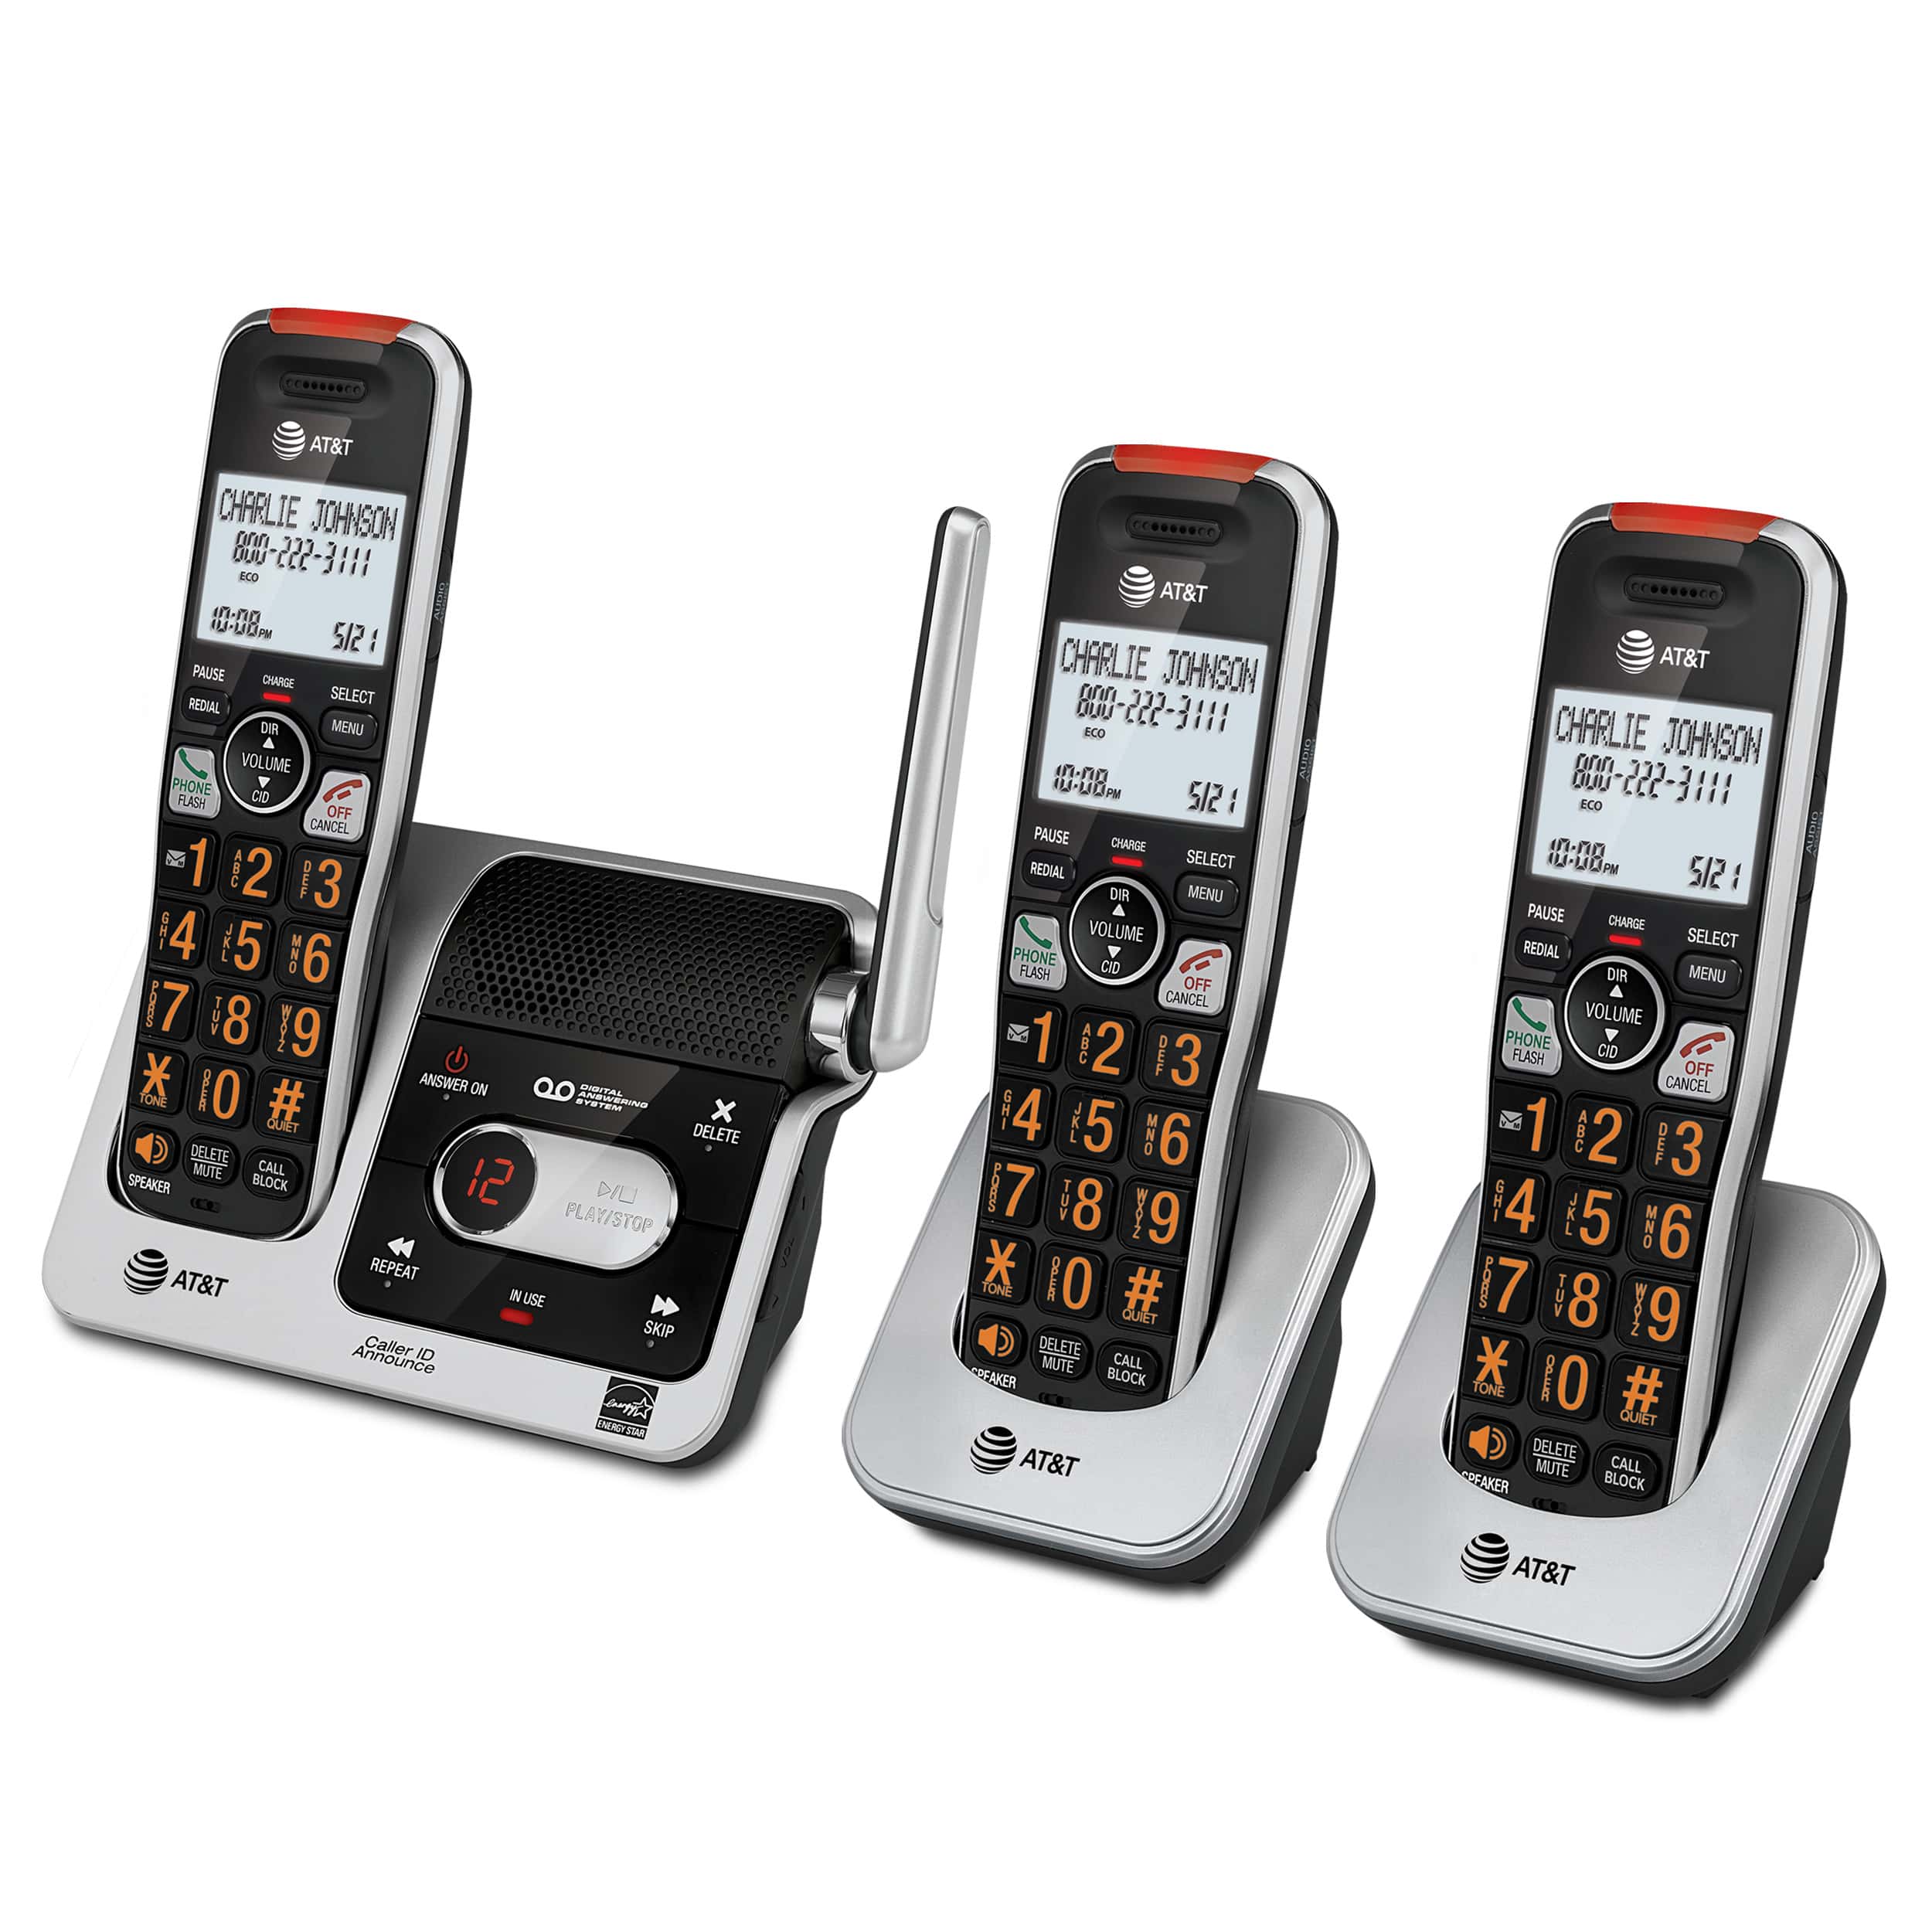 3-Handset Cordless Phone with Unsurpassed Range, Smart Call Blocker and Answering System - view 8